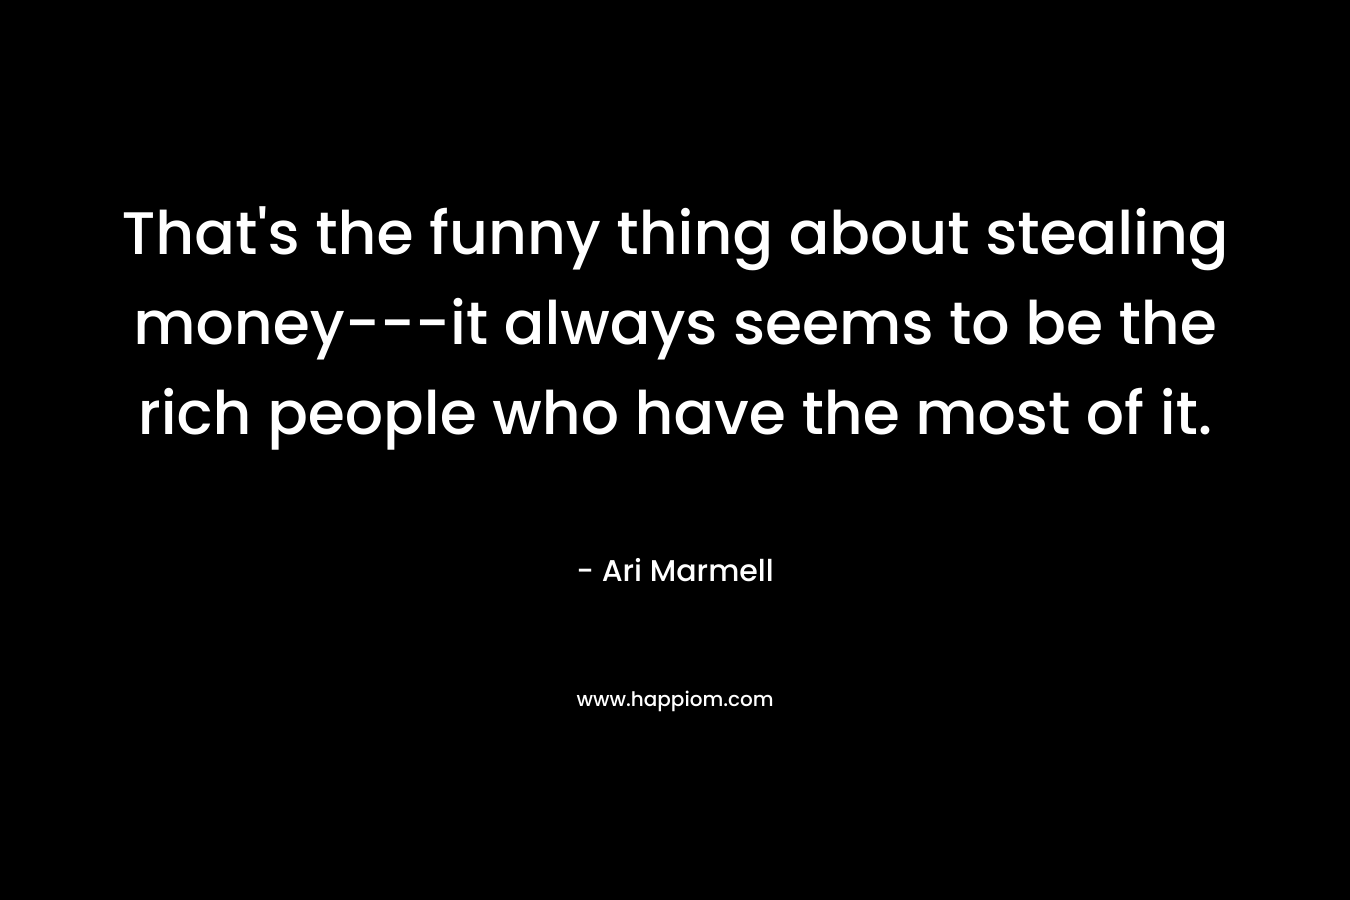 That's the funny thing about stealing money---it always seems to be the rich people who have the most of it.